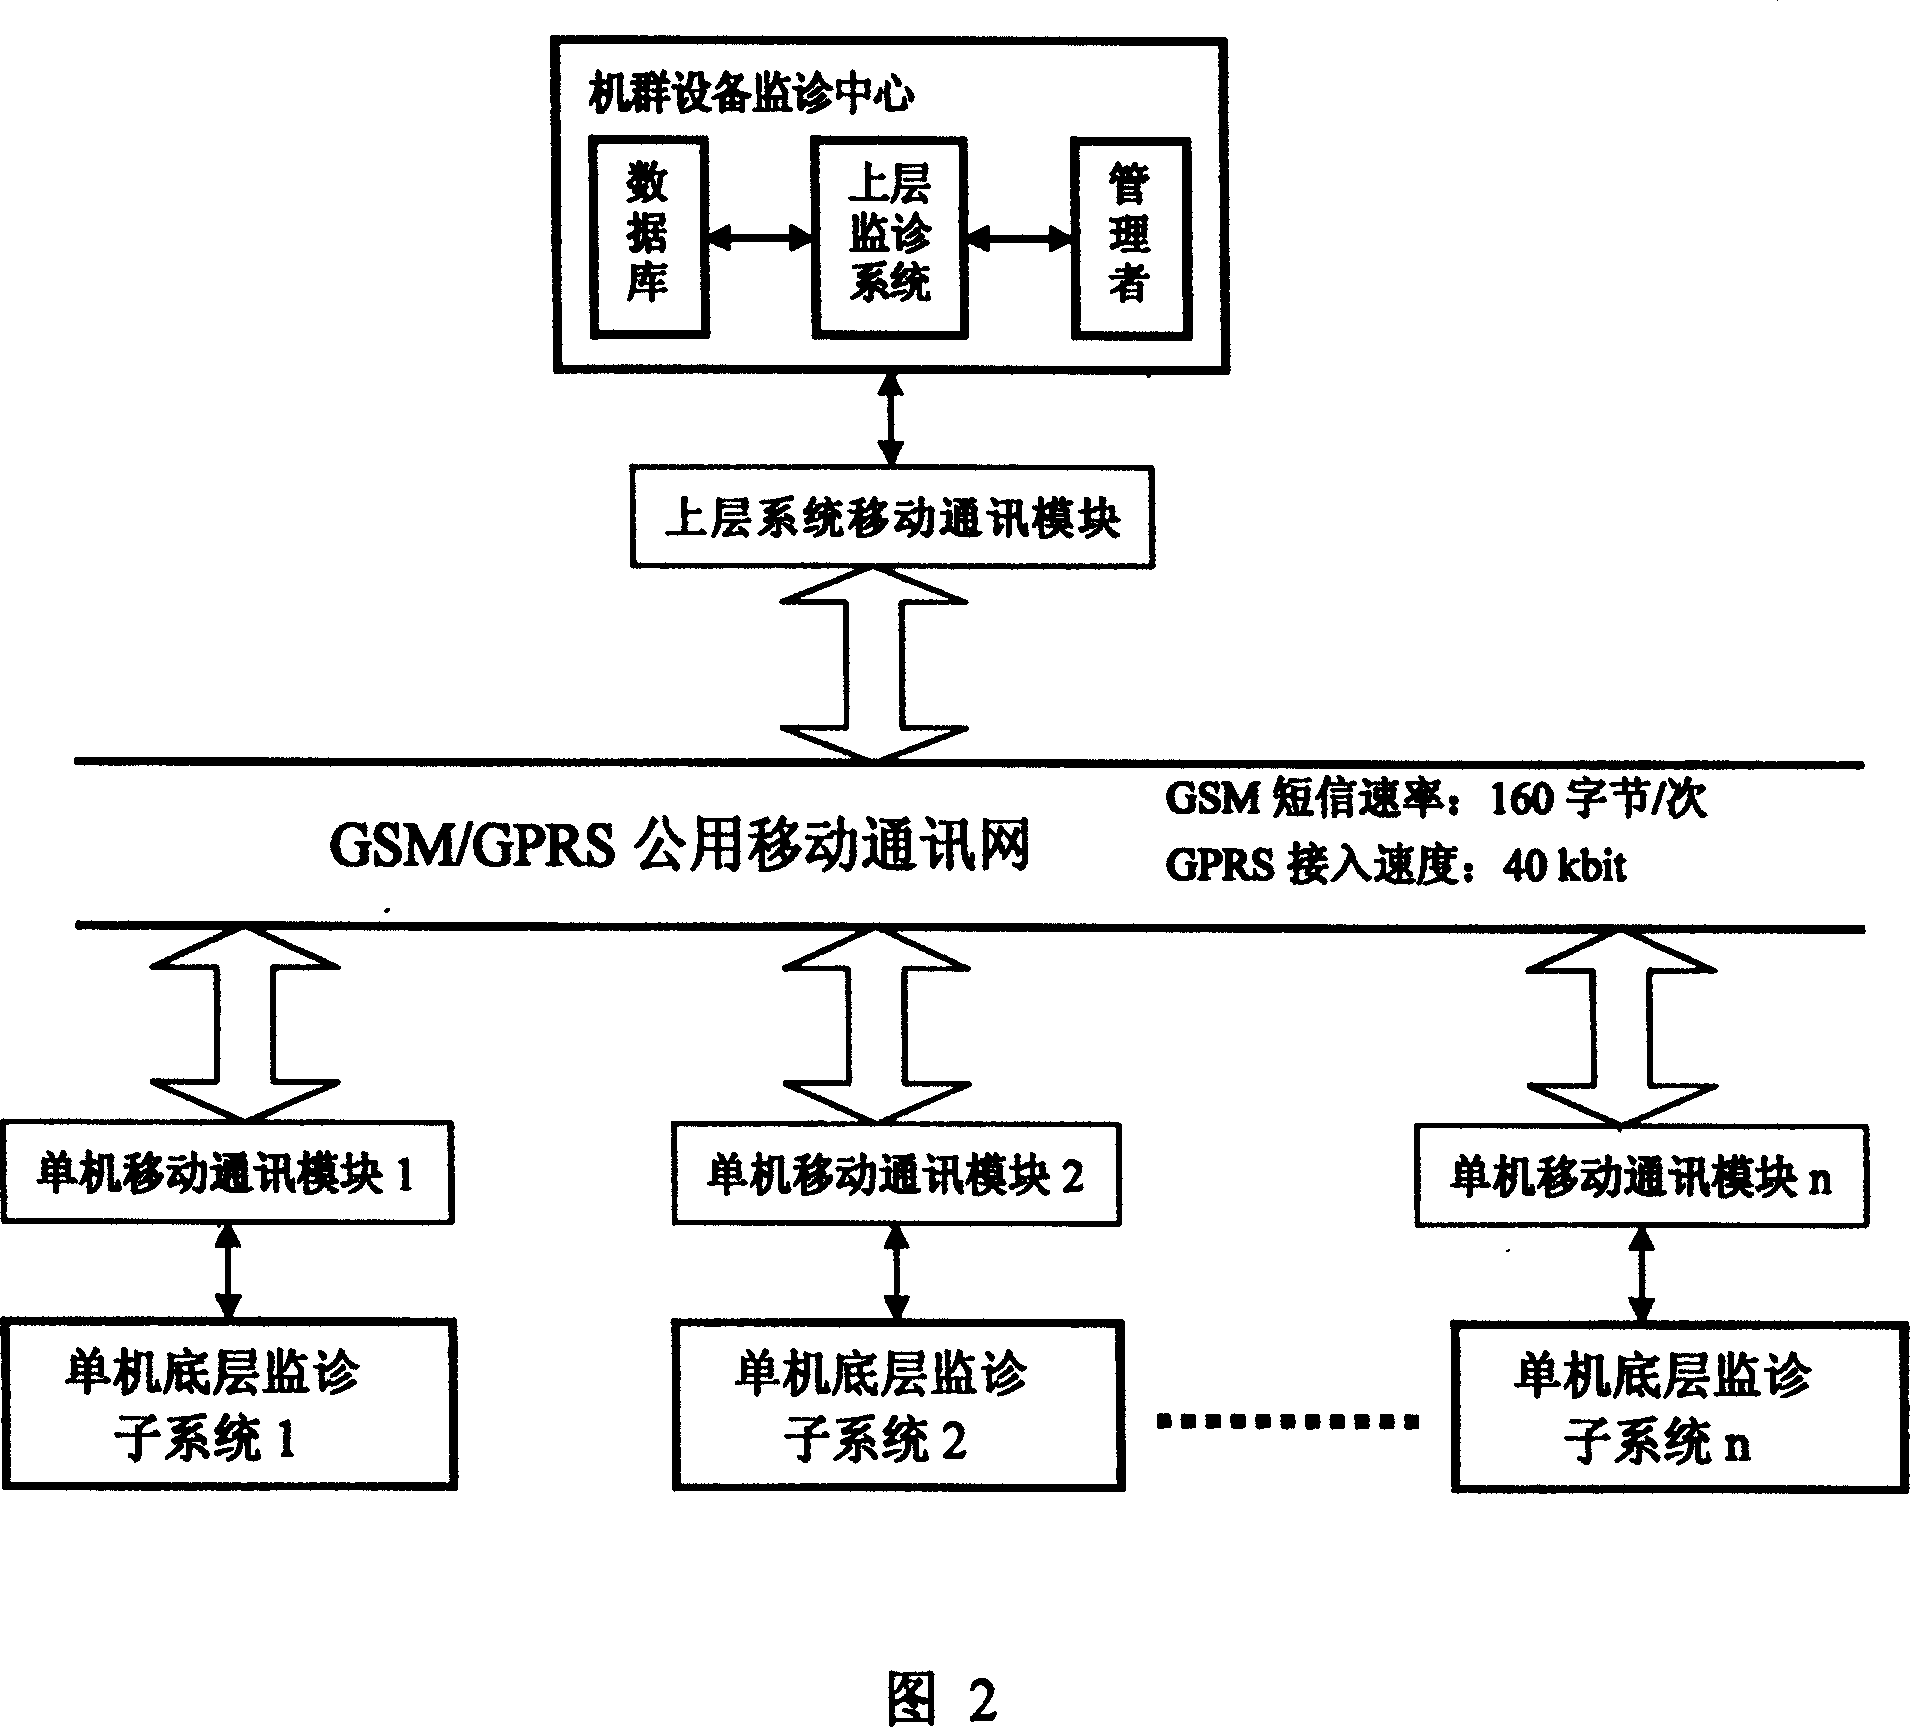 System for monitoring and diagnosing statas and faults of devices in mobile working machine cluster based on network